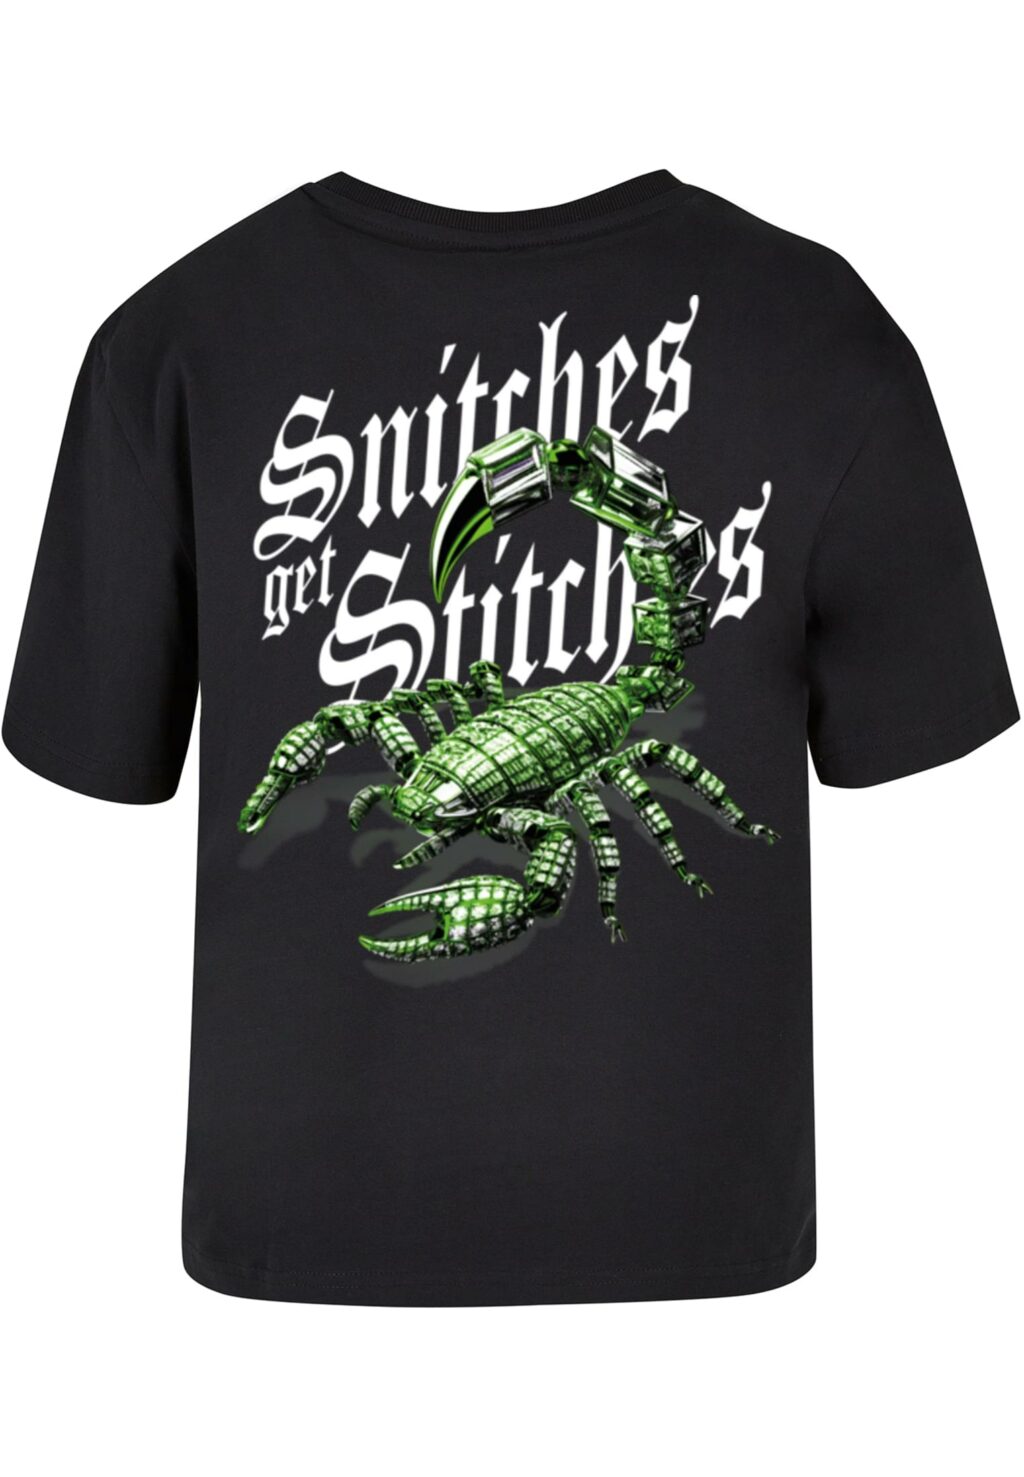 Snitches Get Stitches Tee black MST104